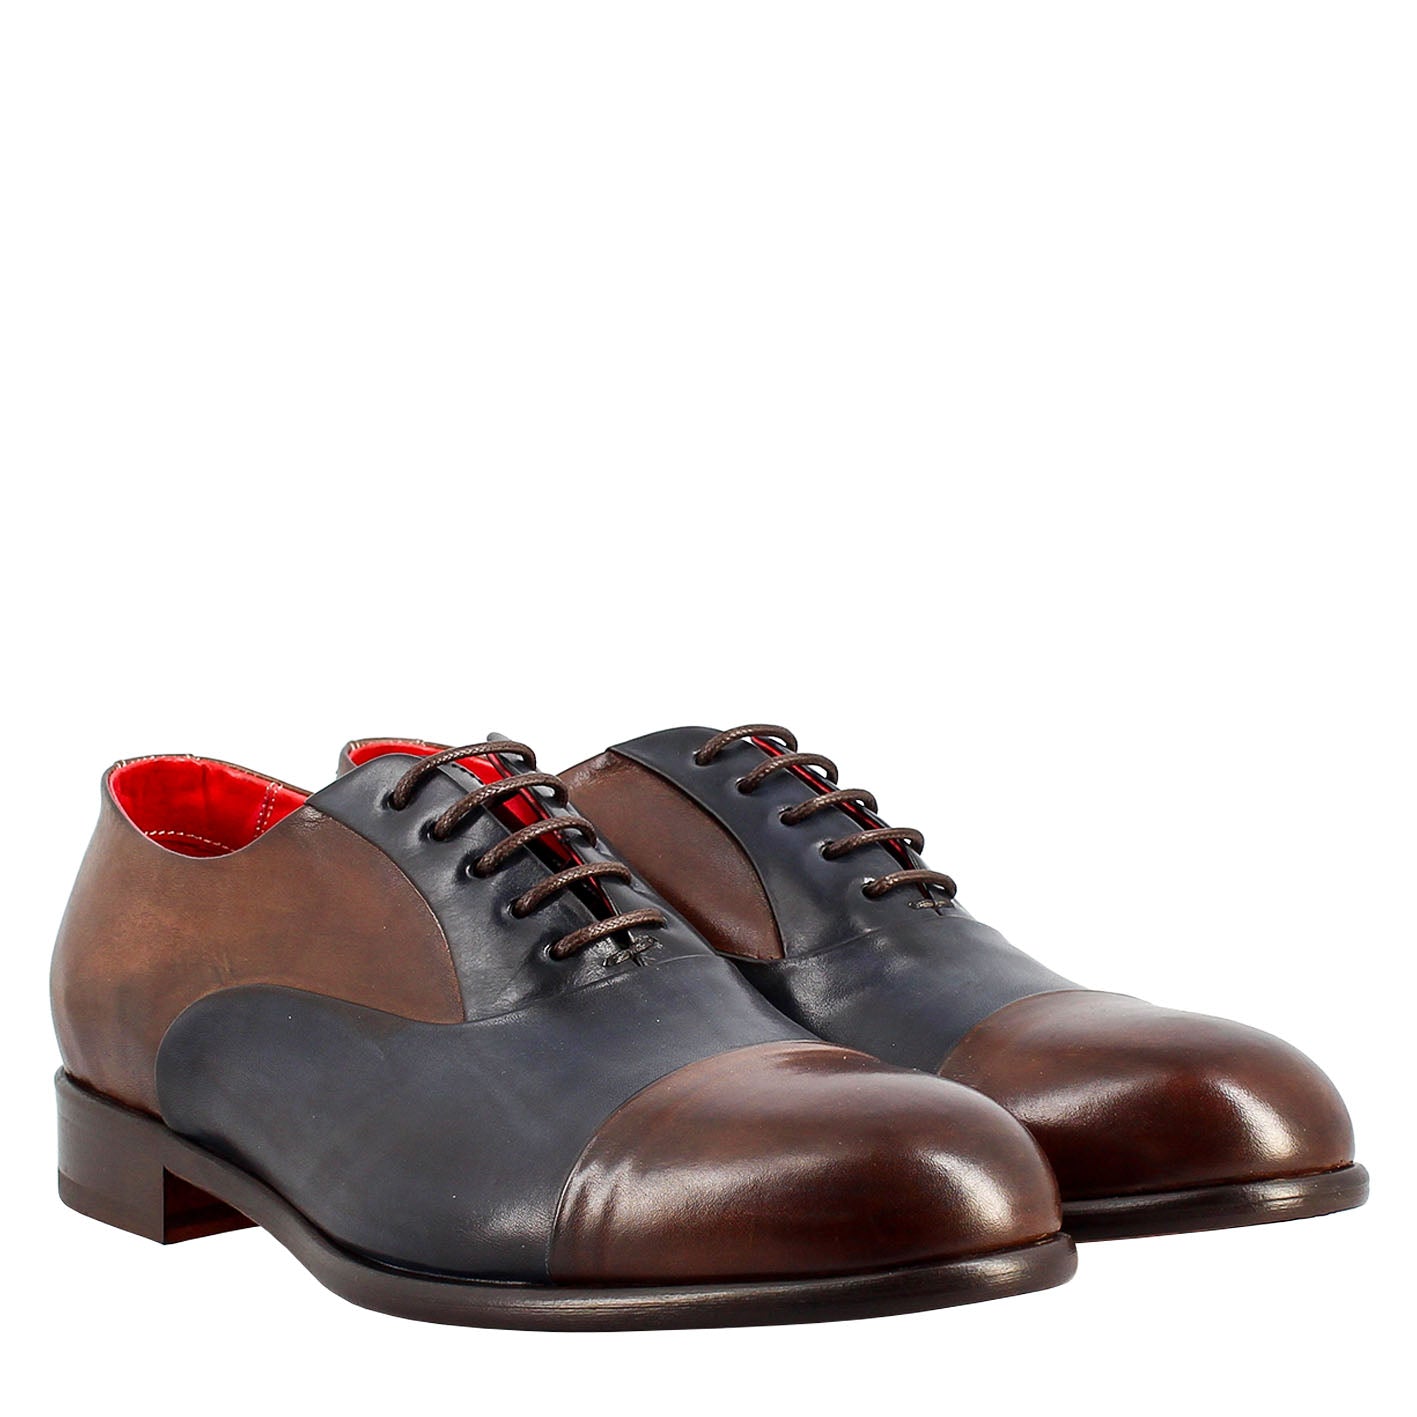 Dark brown and blue elegant men's oxford in leather and red lining